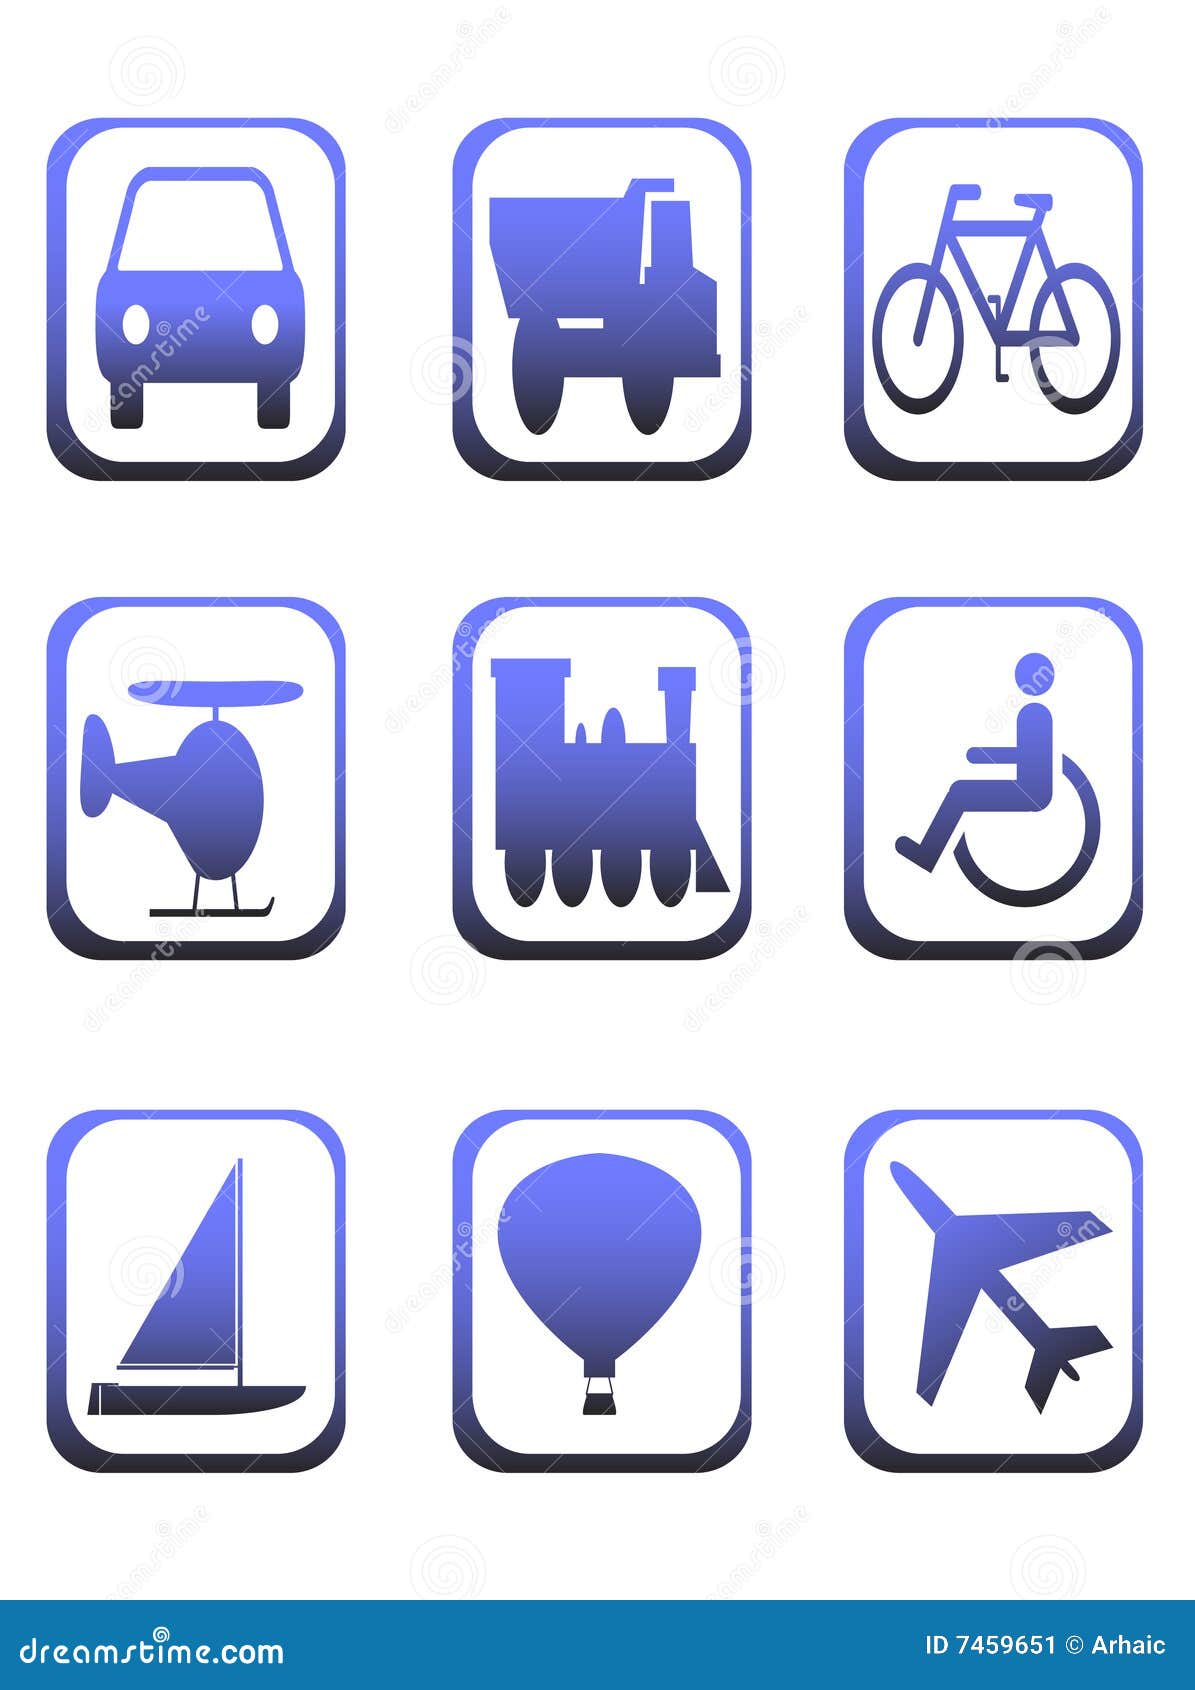 Icons for transportation